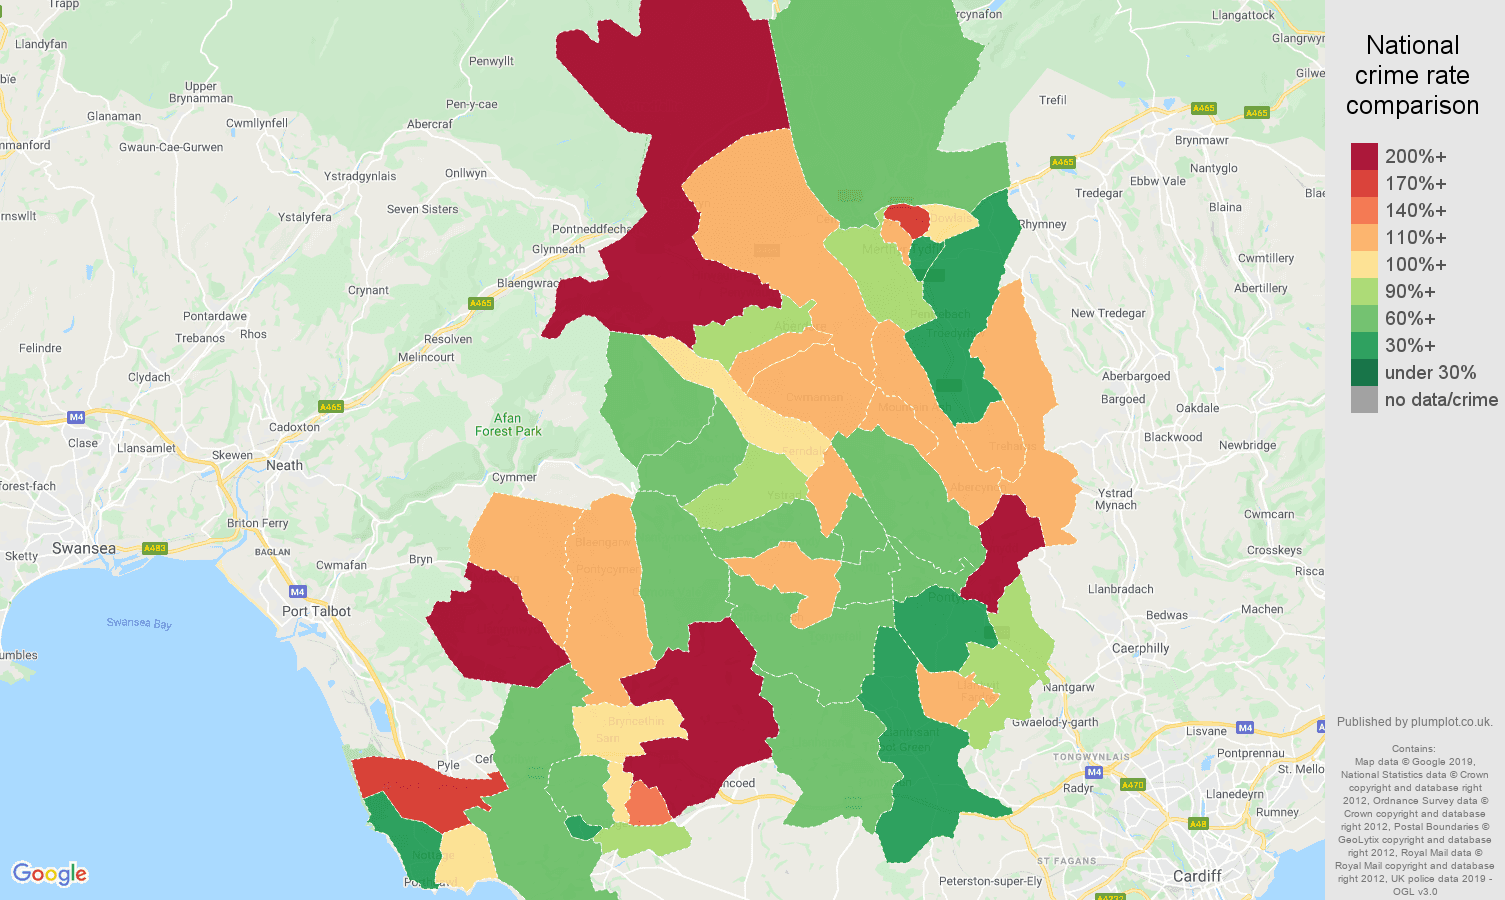 Mid Glamorgan other crime rate comparison map